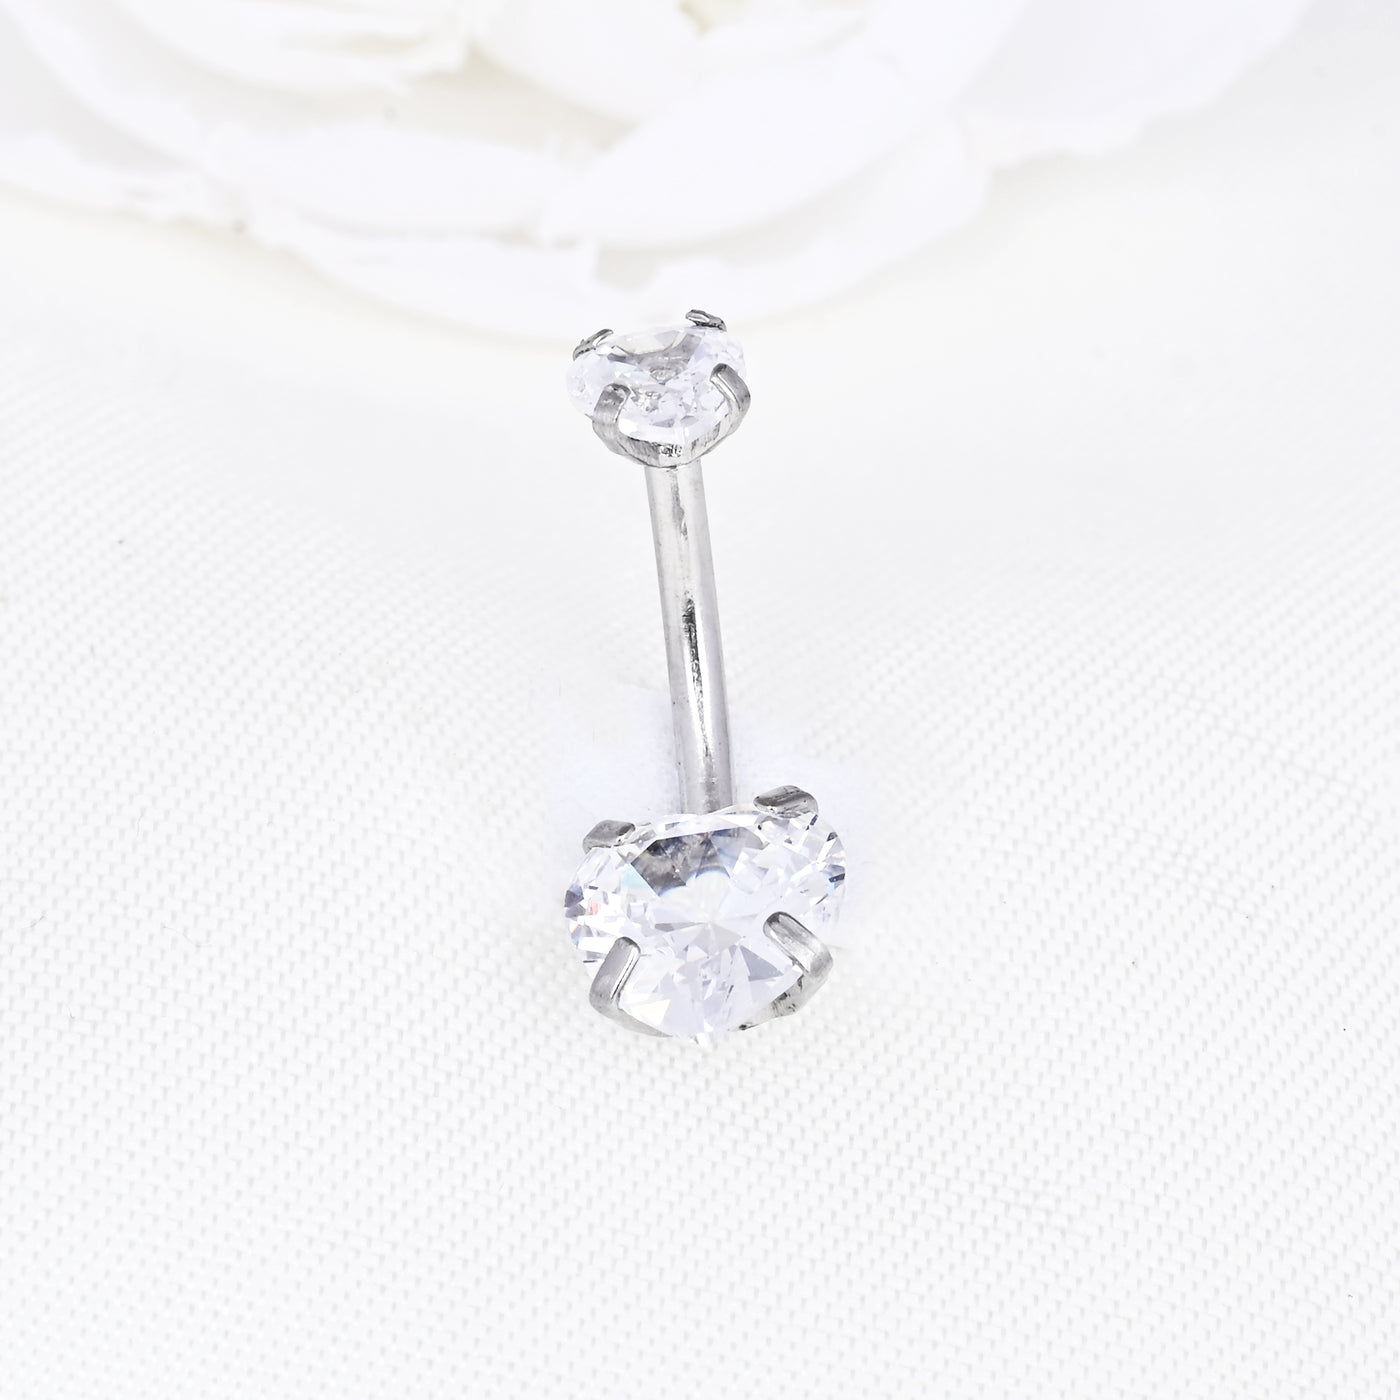 Clear Crystal Heart Belly Button Ring